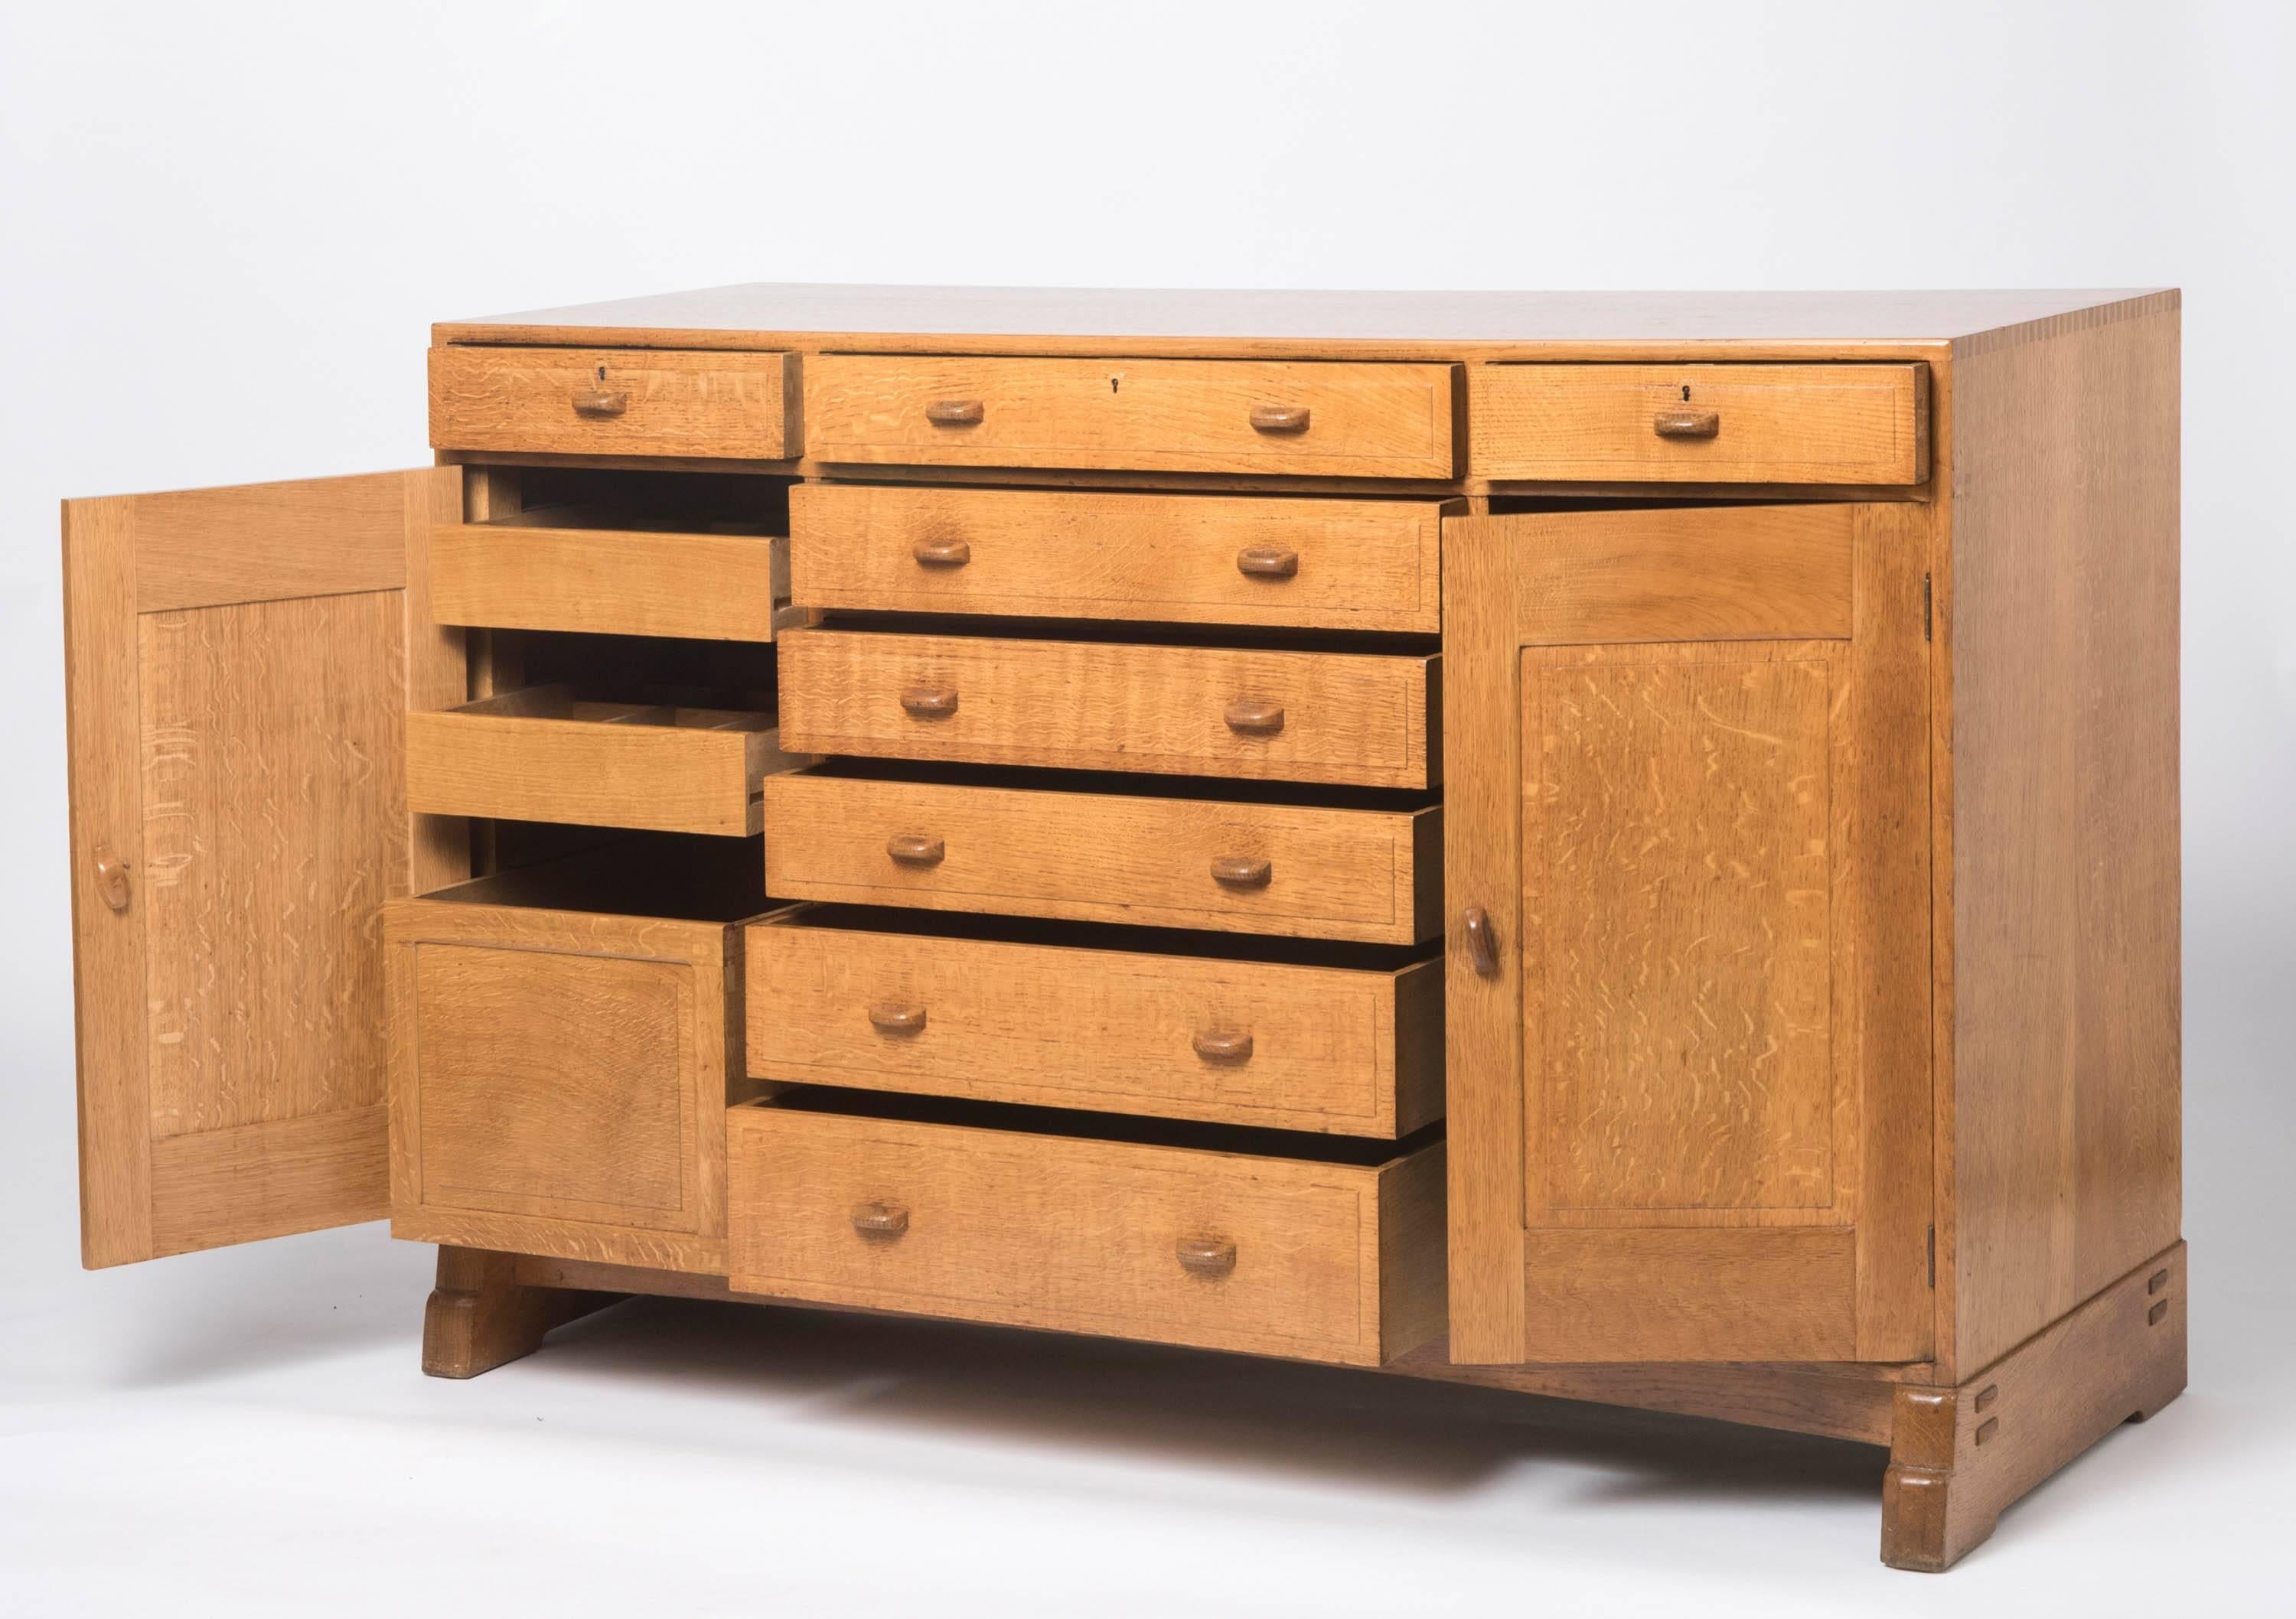 A superb oak sideboard attributed to Peter Waals (Dutch, 1870-1937).
The central six graduated drawers flanked by two further drawers and cupboards.
Exposed dovetails. Shaped handles.
On stepped supports with exposed joints.
England, circa